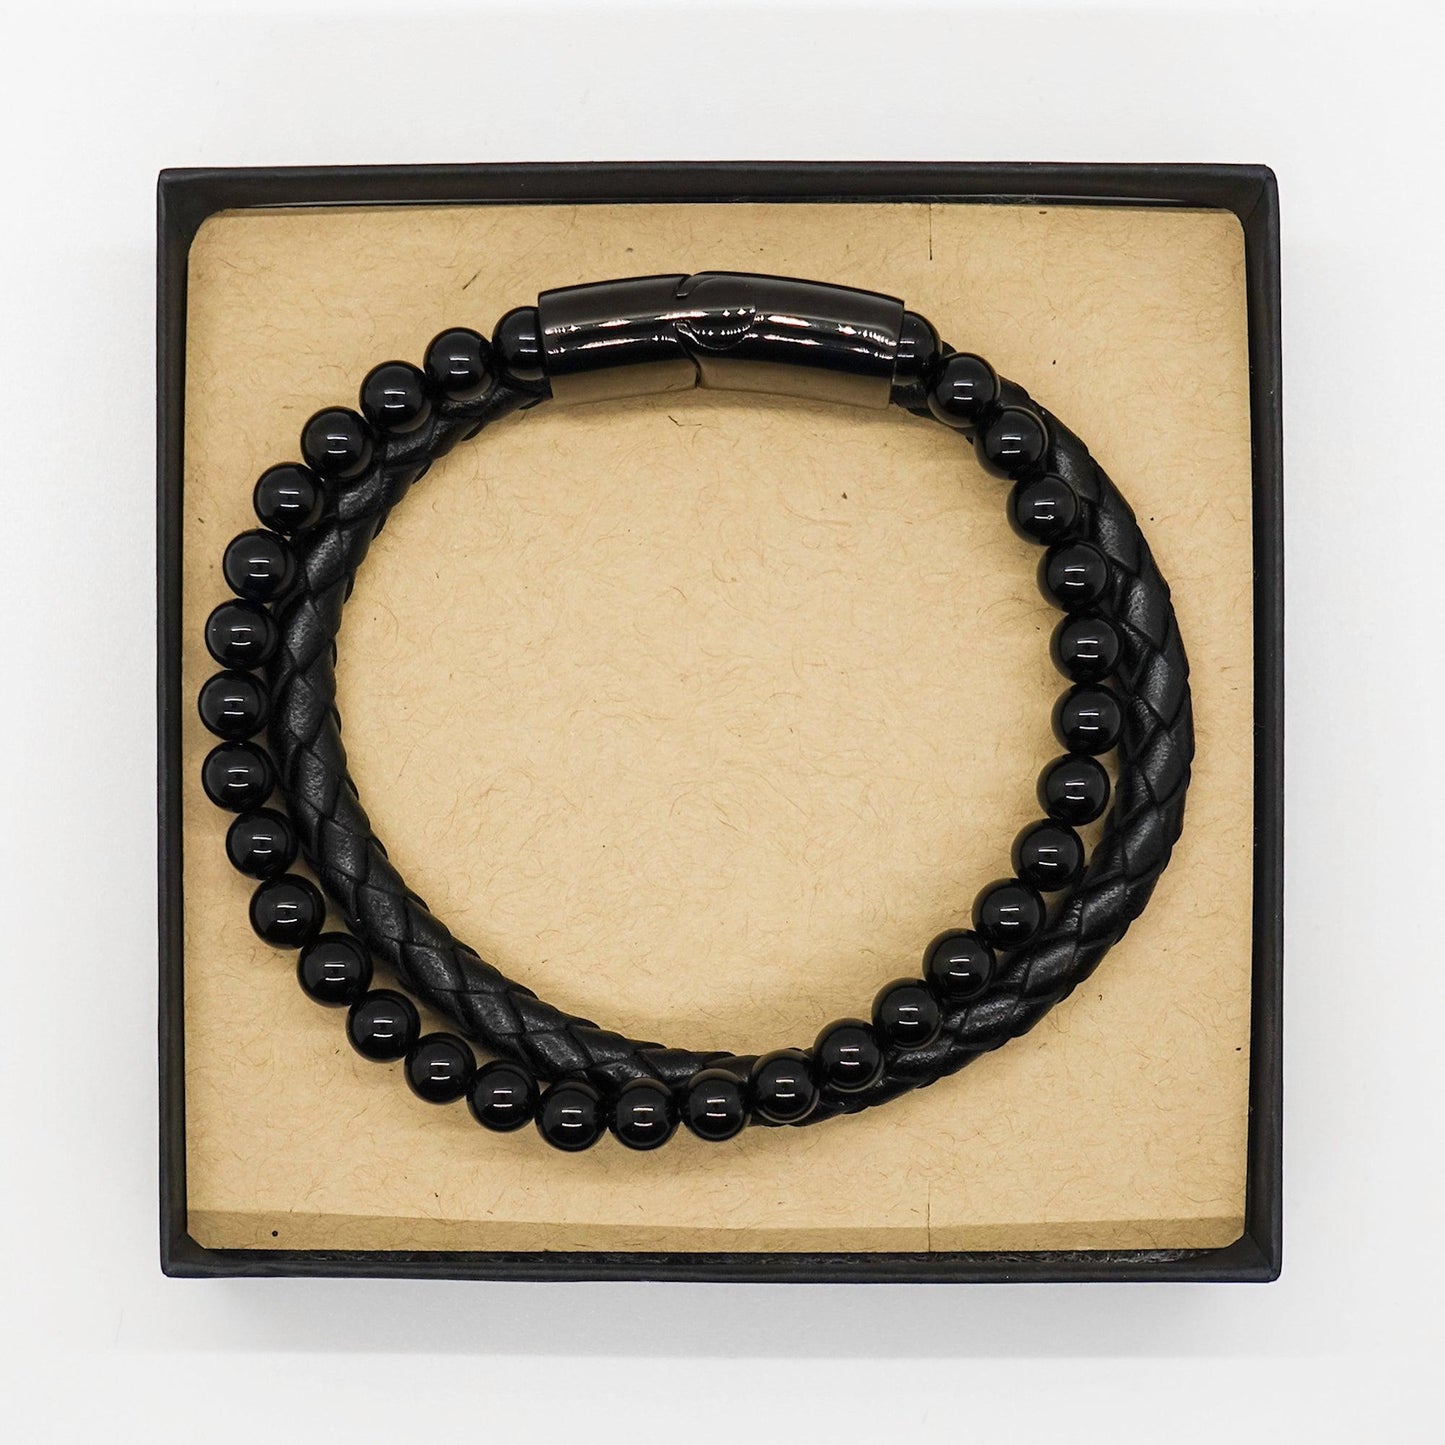 Landscape Designer Black Braided Leather Stone Bracelet - Thanks for being who you are - Birthday Christmas Jewelry Gifts Coworkers Colleague Boss - Mallard Moon Gift Shop